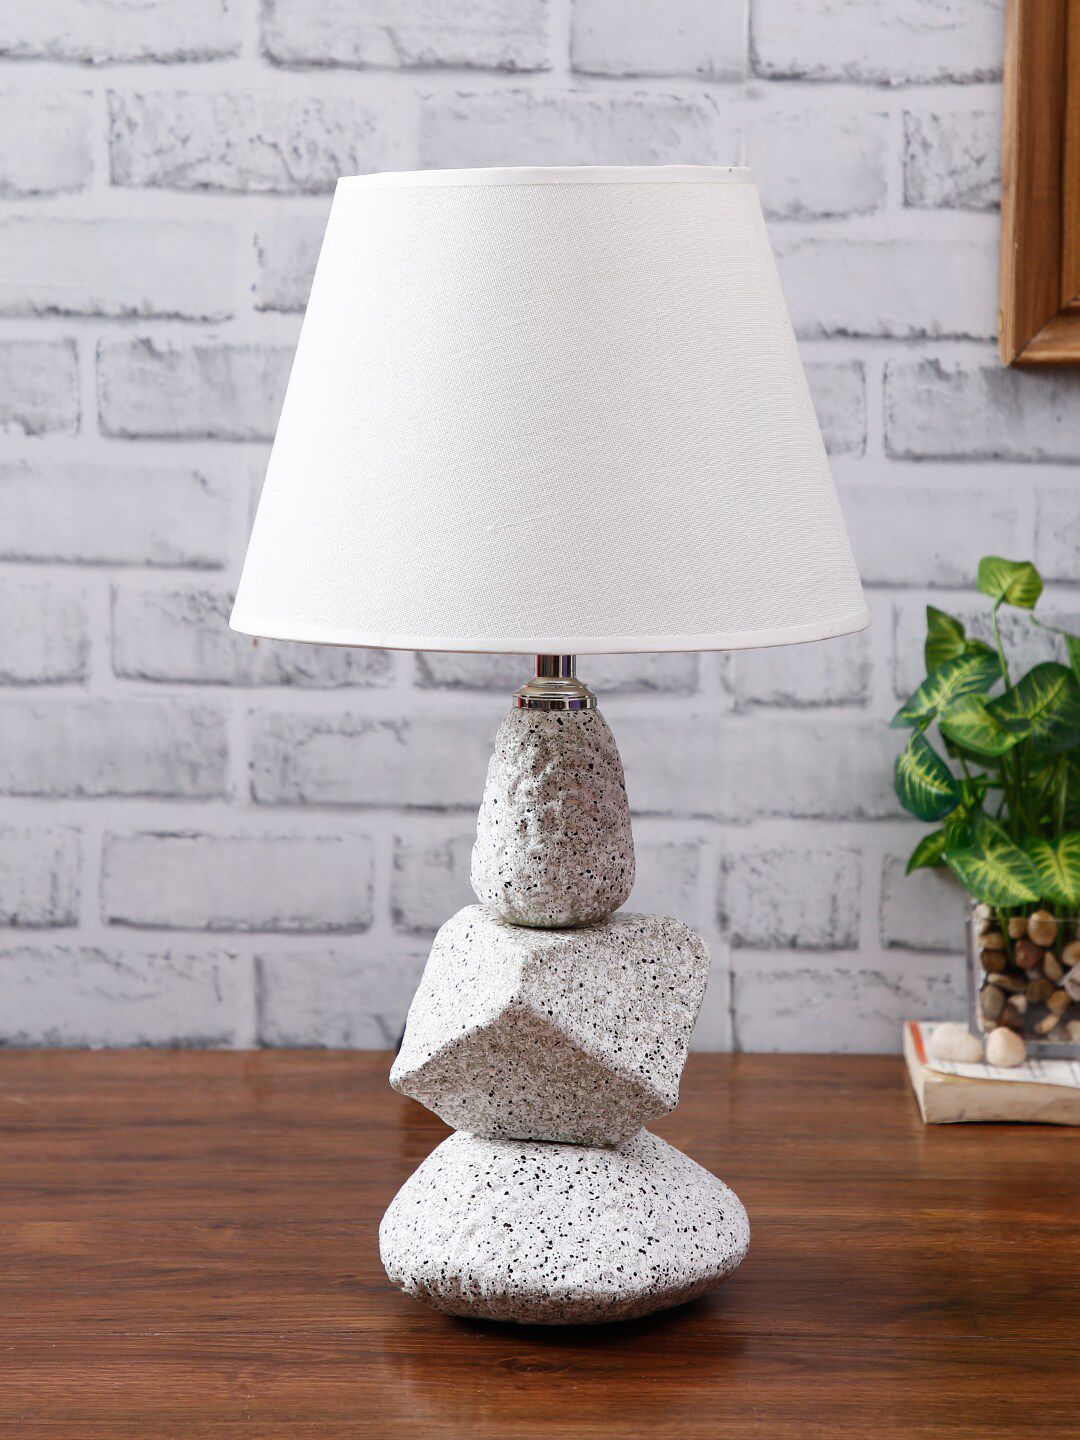 House Of Accessories White Ceramic Contemporary Table Lamp with Shade Price in India